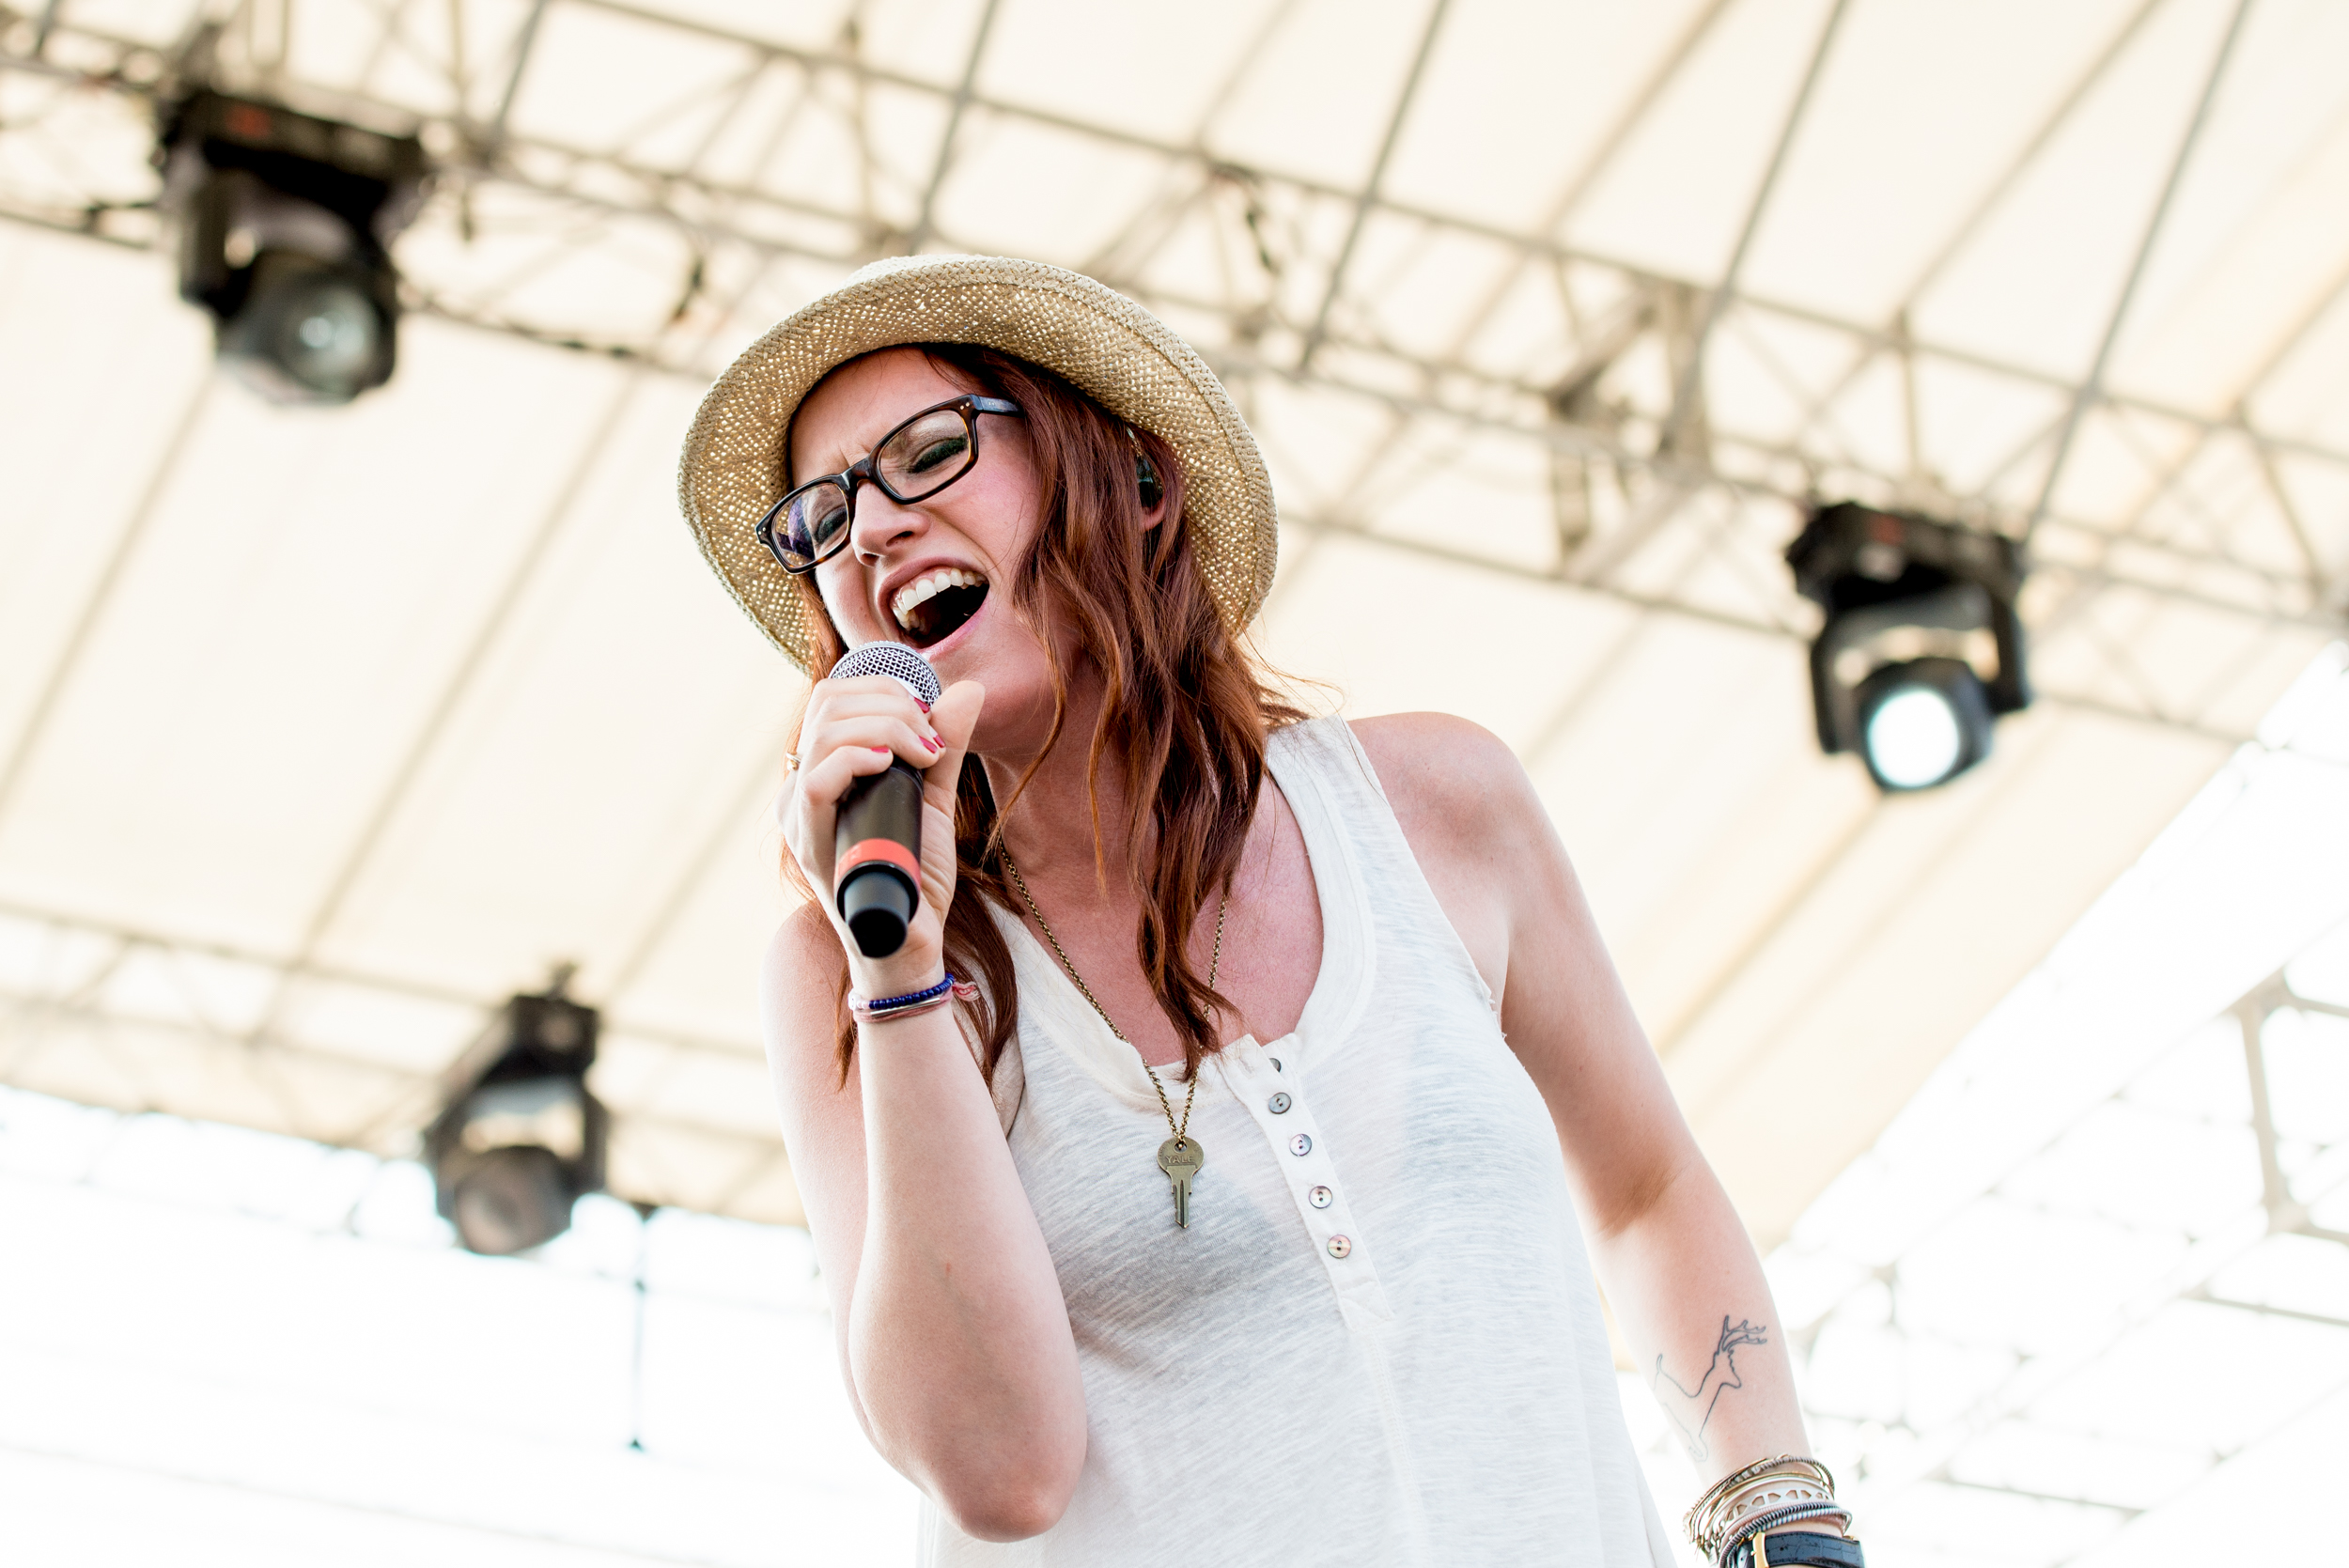 Ingrid Michaelson at XPoNential Music Festival,